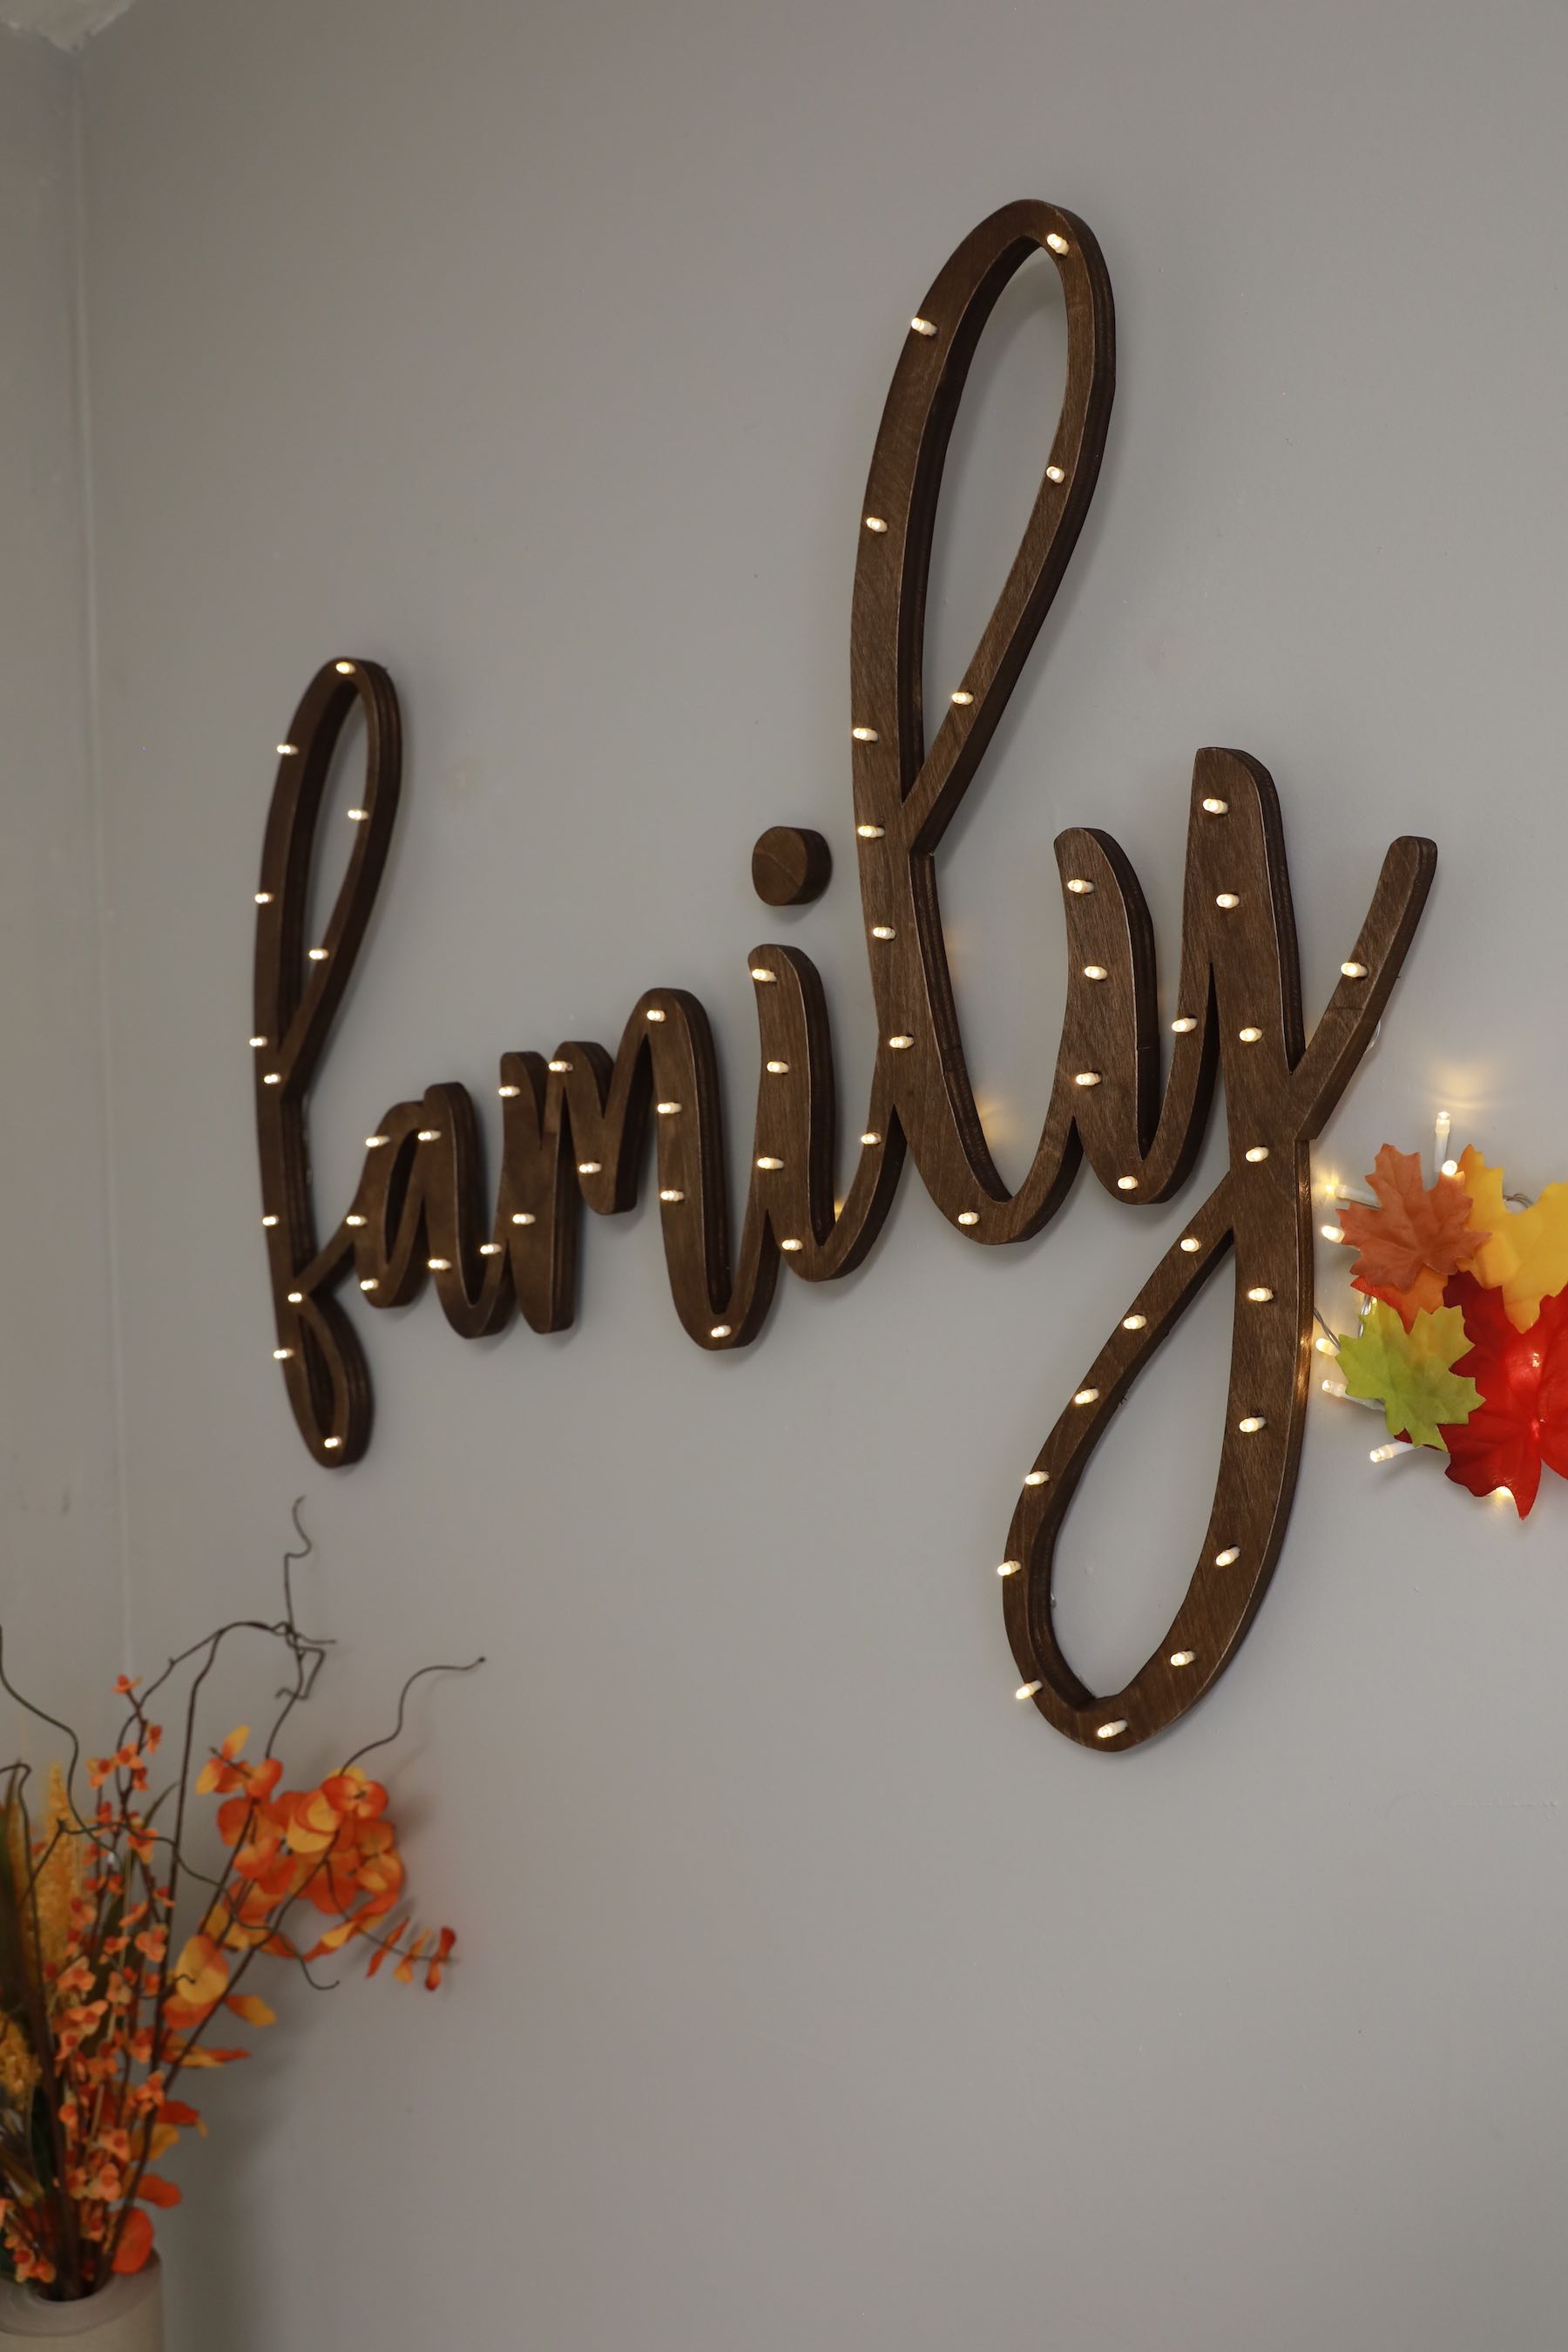 Wood Wall Art Ideas: DIY word light sign made out of wood - Thrift Diving